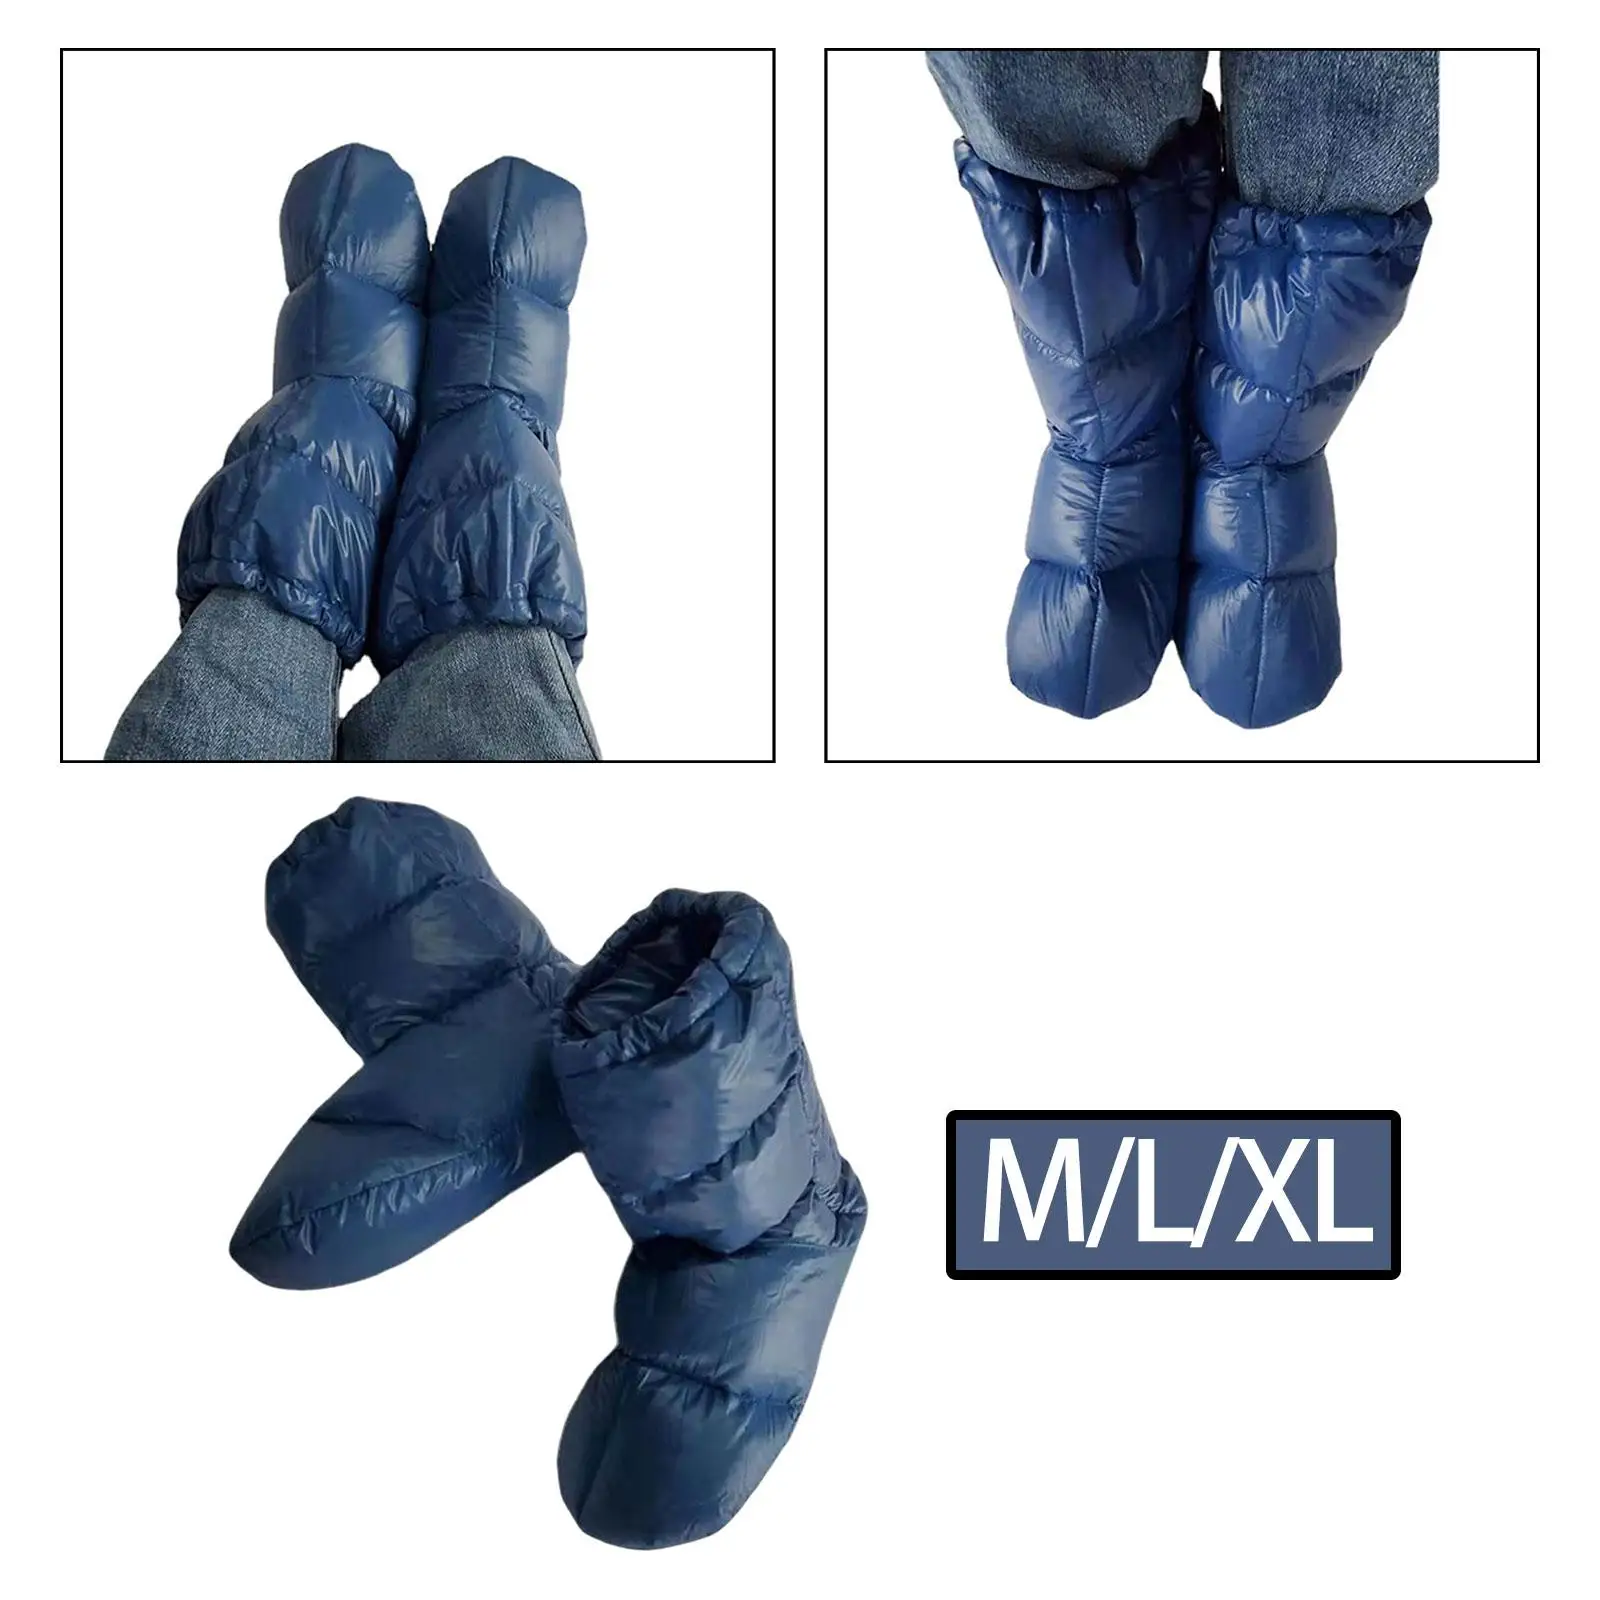 Down Slippers Feet Cover Socks Cozy Warmer Comfortable Warm Bootie Shoes for Skiing Hiking